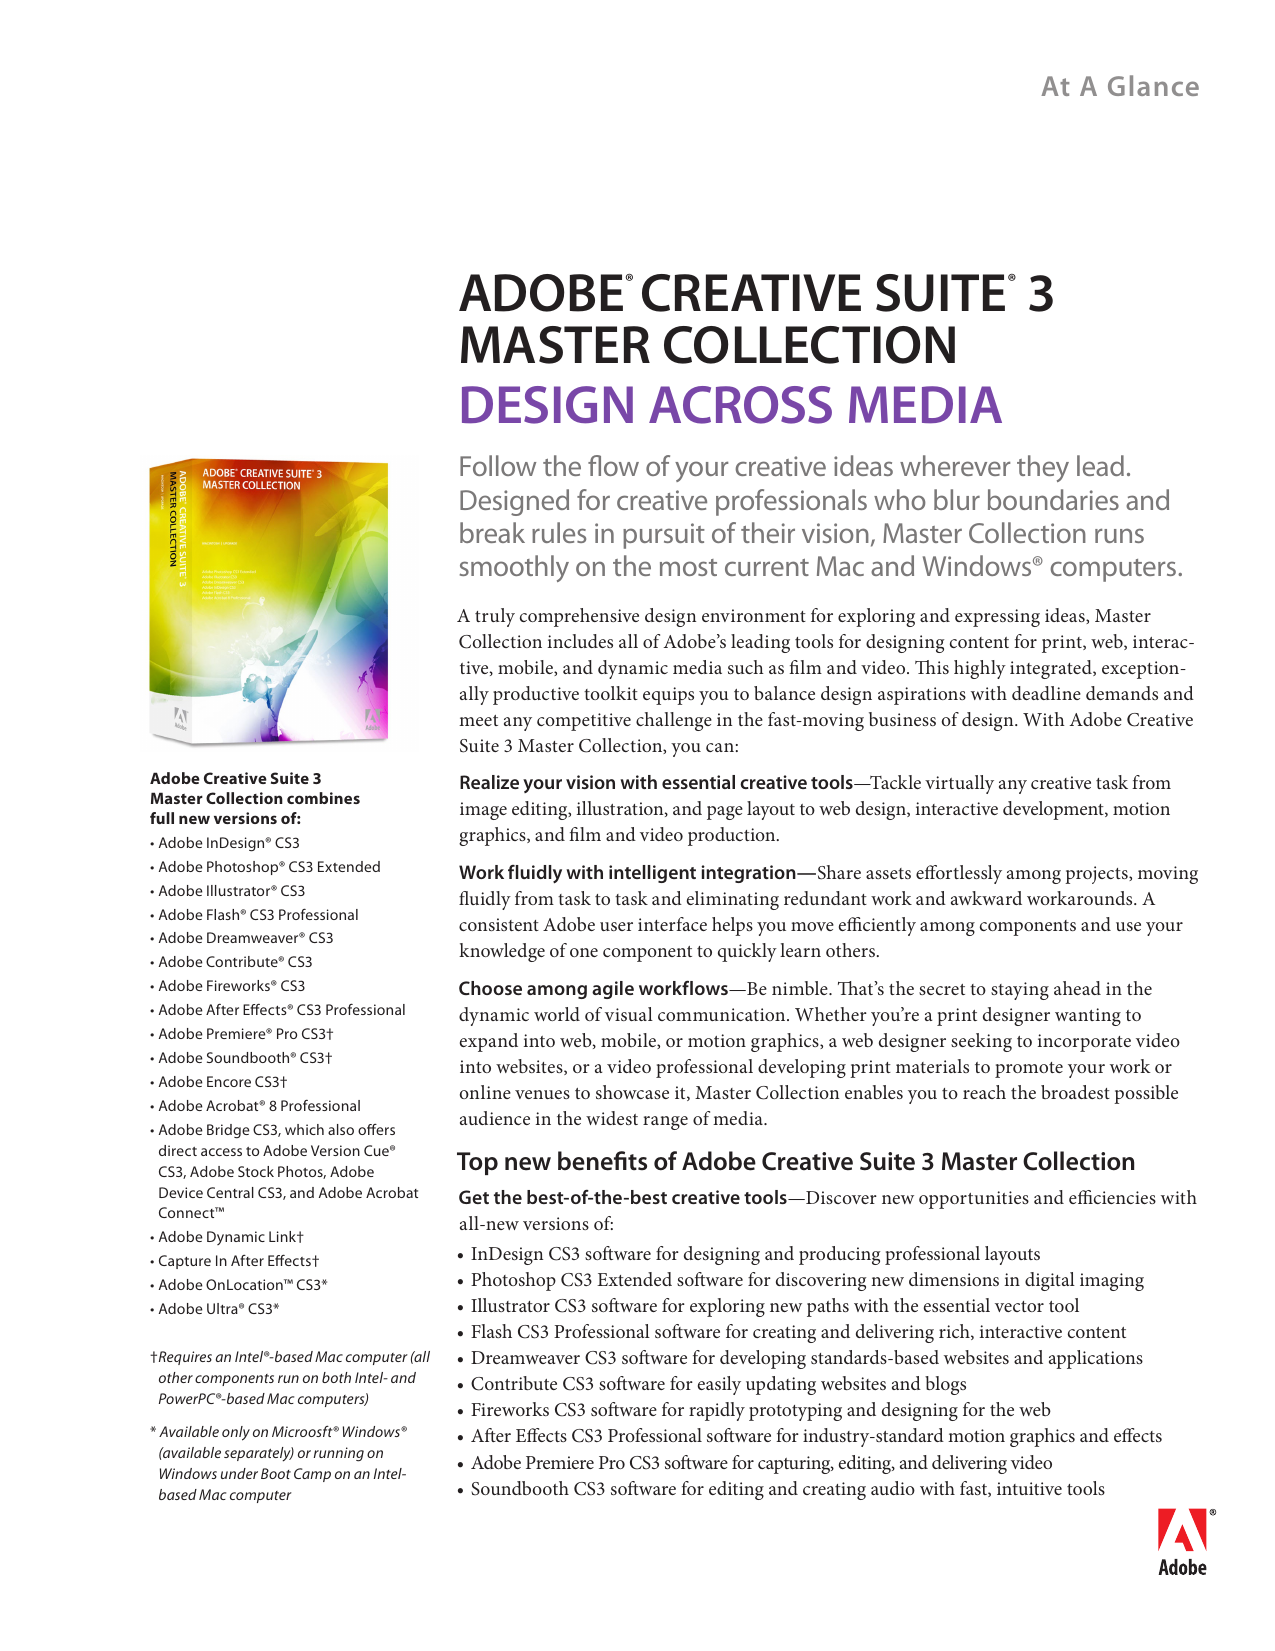 adobe cs3 master collection contents